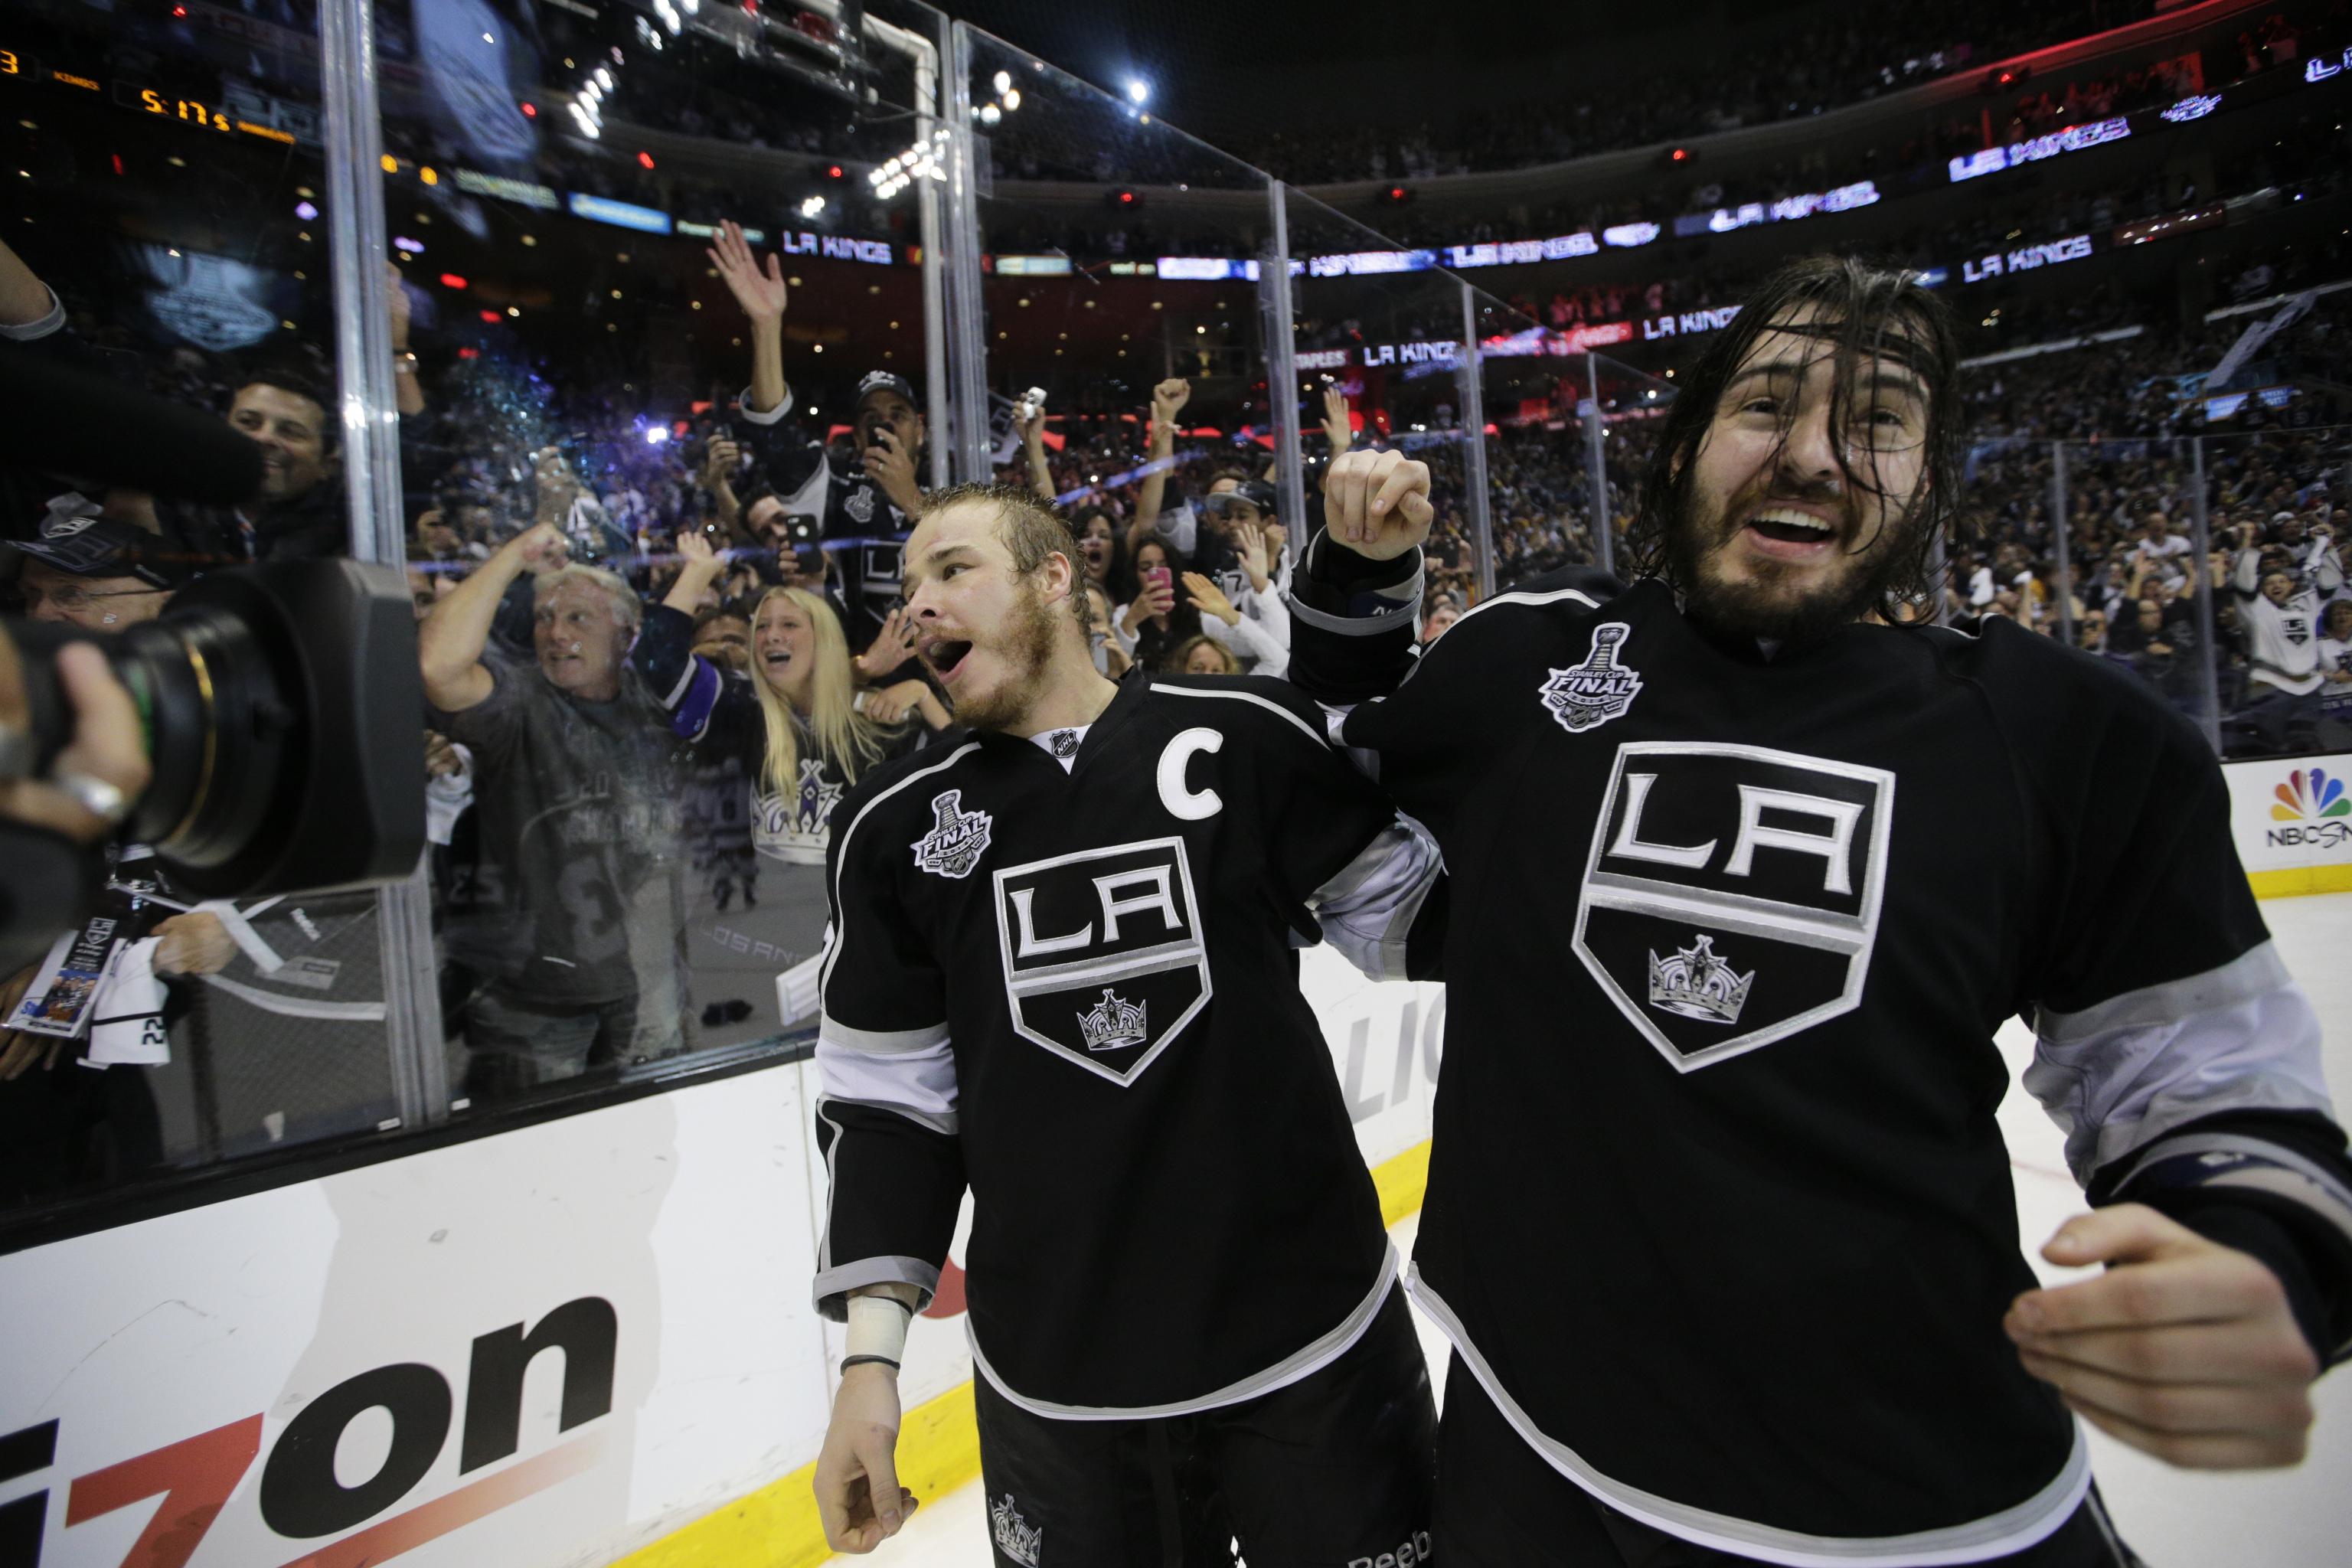 L.A. Kings win their first Stanley Cup - CBS News